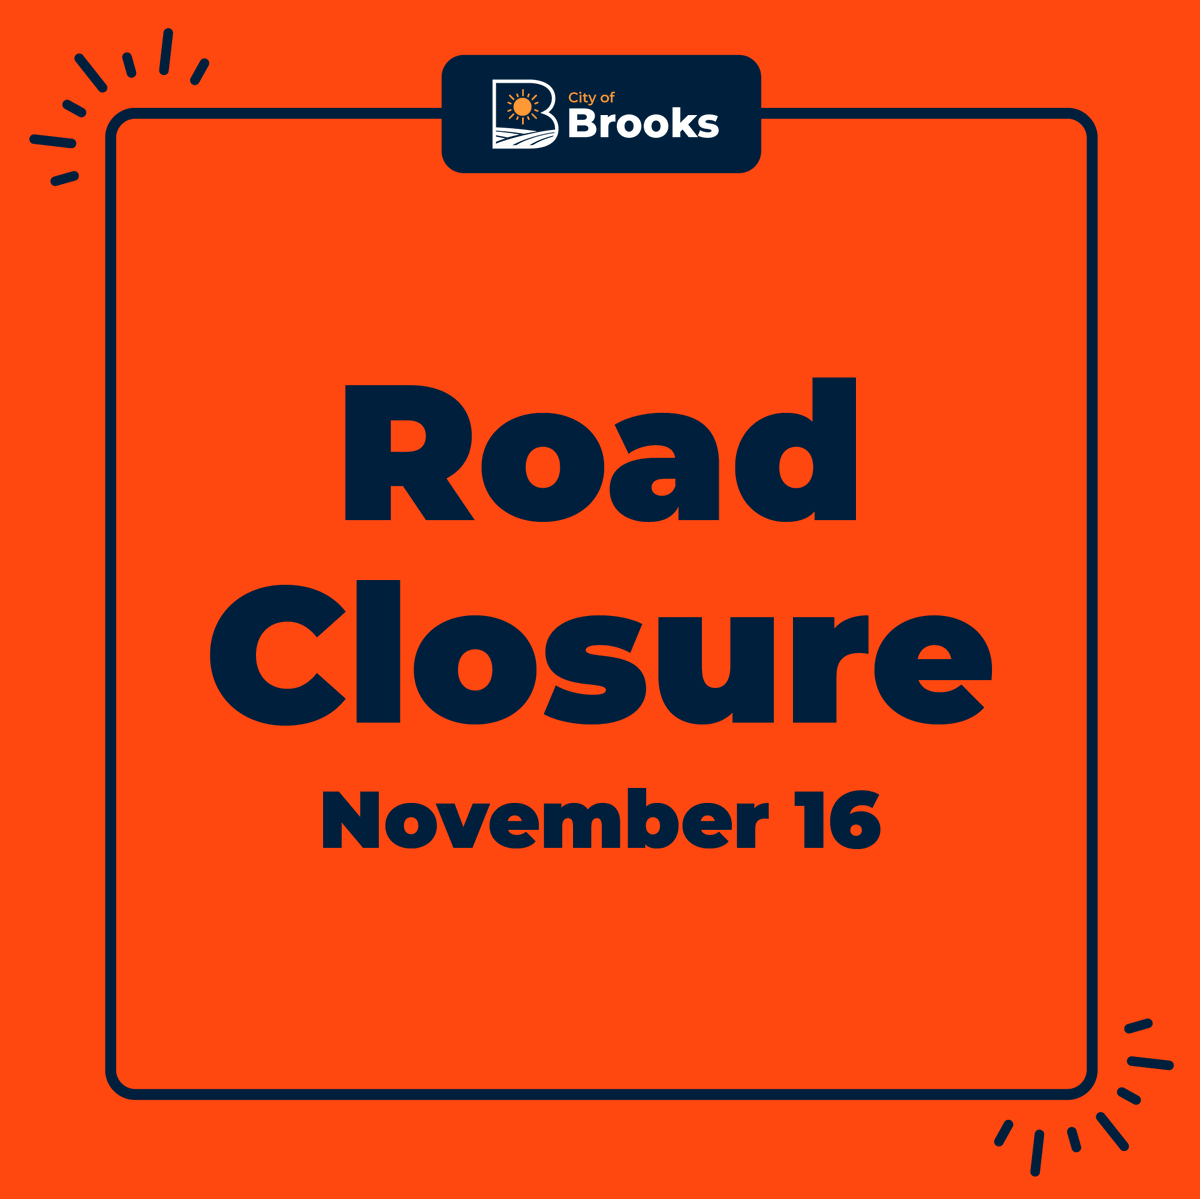 1st Ave will be closed between 1st St W and 2nd St W, as well as behind City Hall for Christmas in the Park! There will also be blockages along 2nd St W during the Santa Clause Parade.